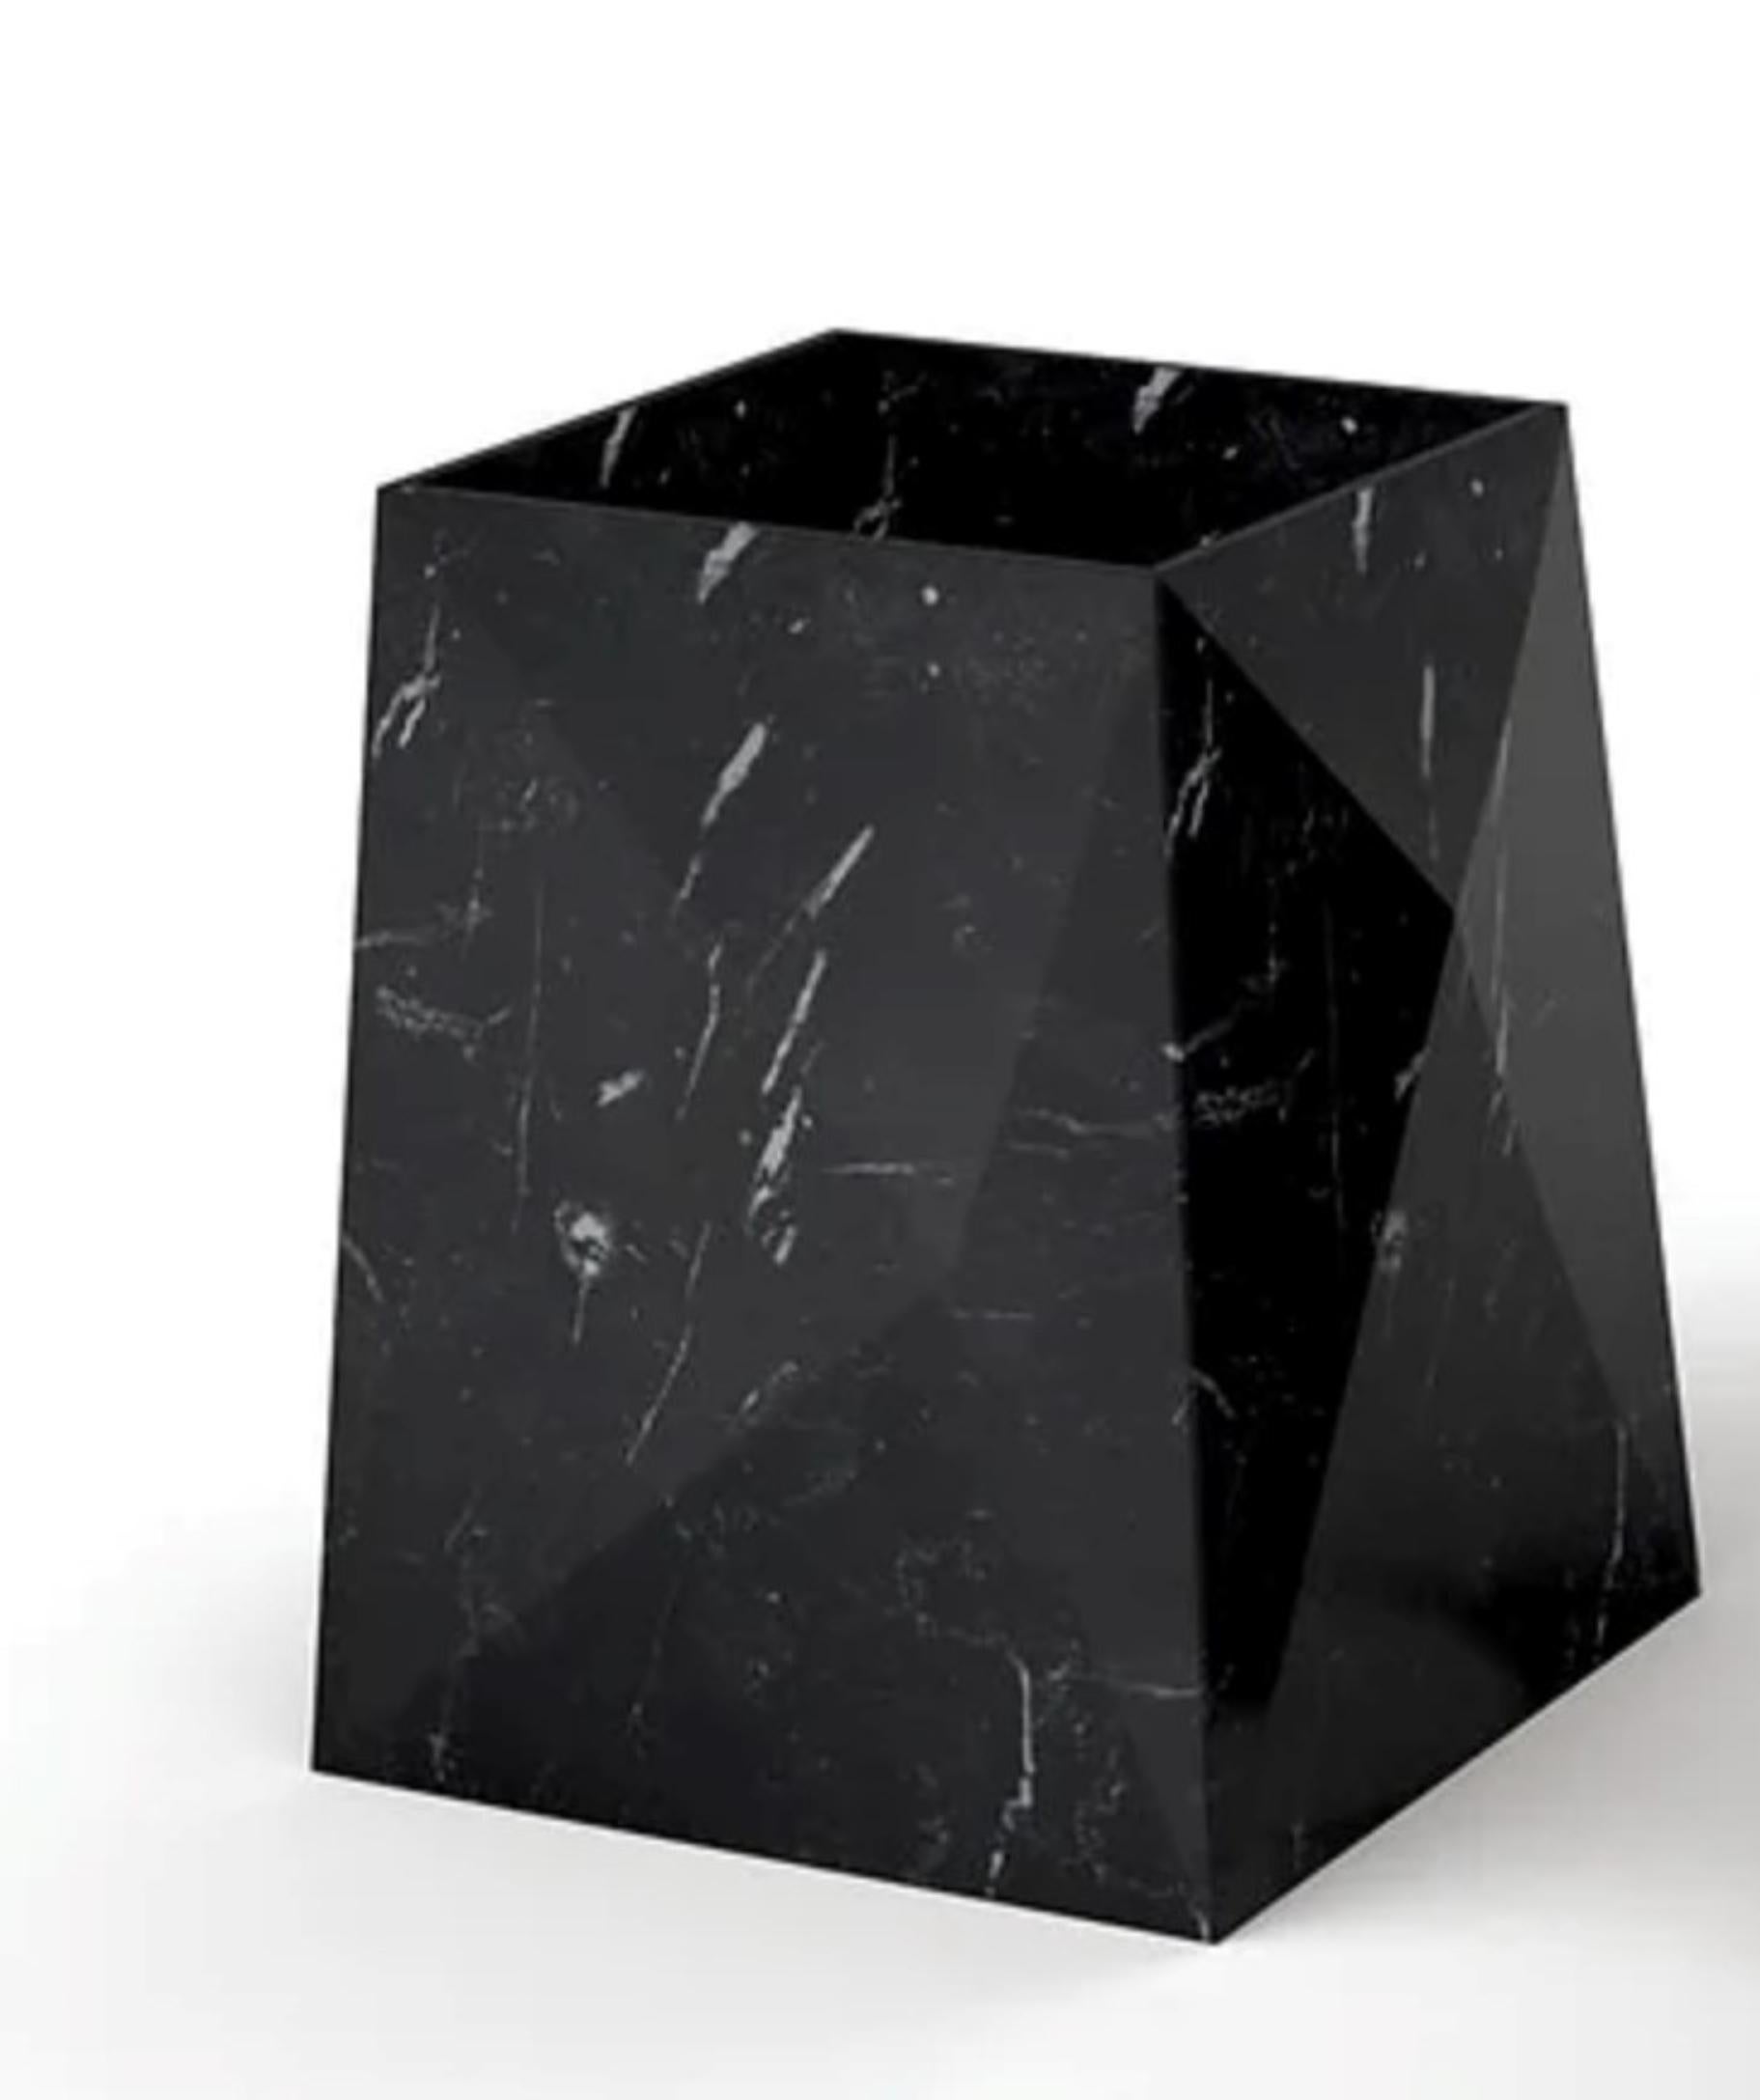 Medium Entity Punta washbasin by Marmi Serafini
Materials: Nero Marquinia marble.
Dimensions: D 50 x W 50 x H 50 cm
Available in other marbles and colors.
Tap not included.

Bold and striking lines that draw immediate attention. Slightly